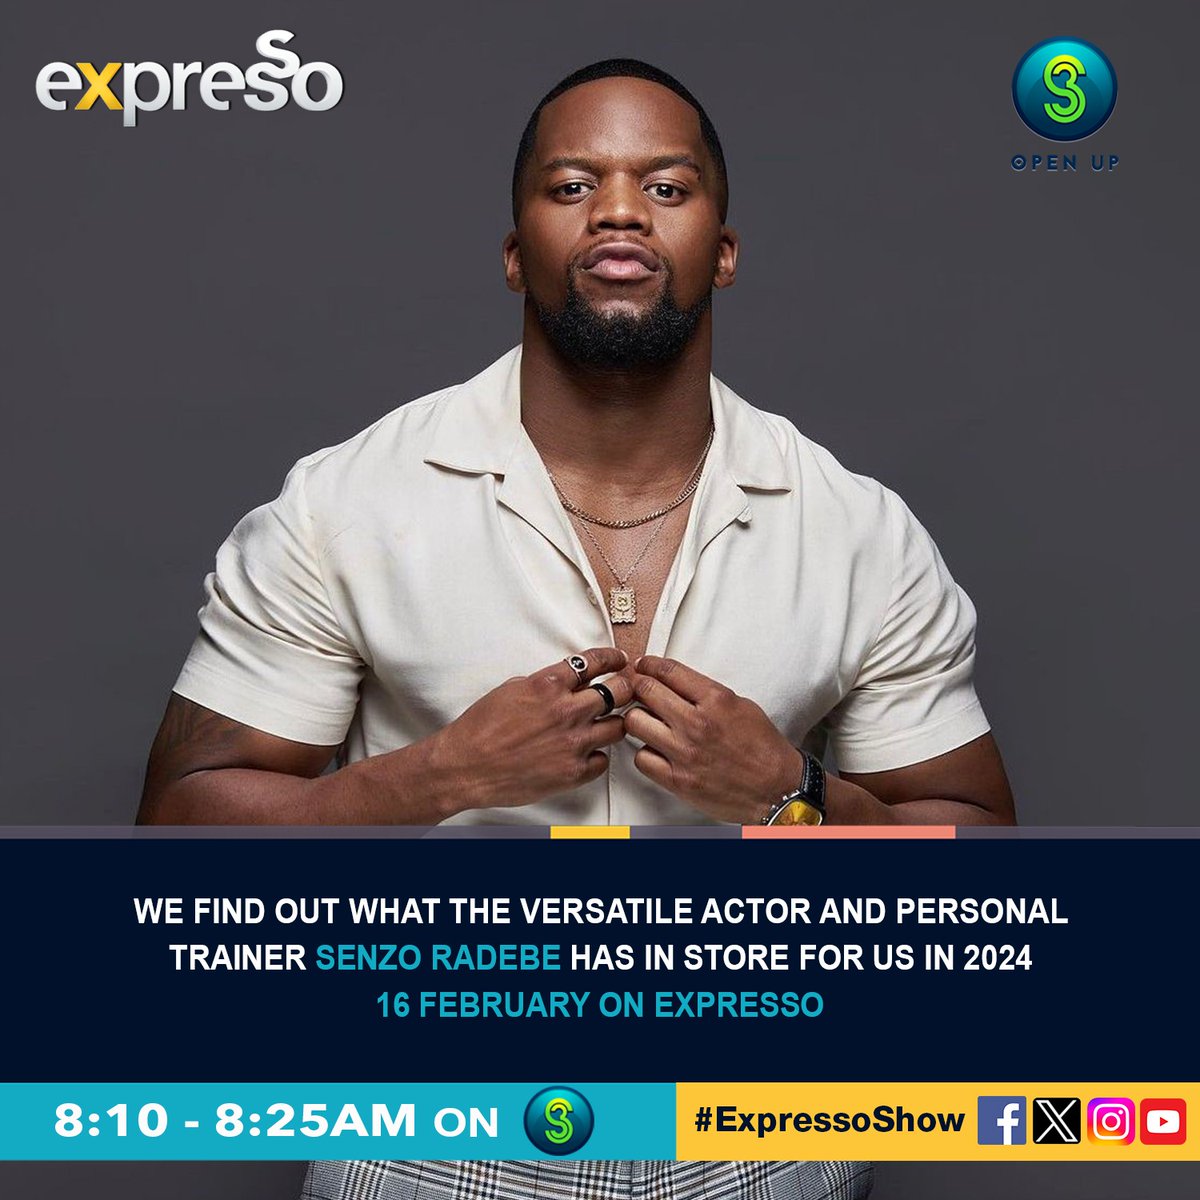 The one and only @senzo__radebe tomorrow on #ExpressoShow 6-9AM on @SABC3